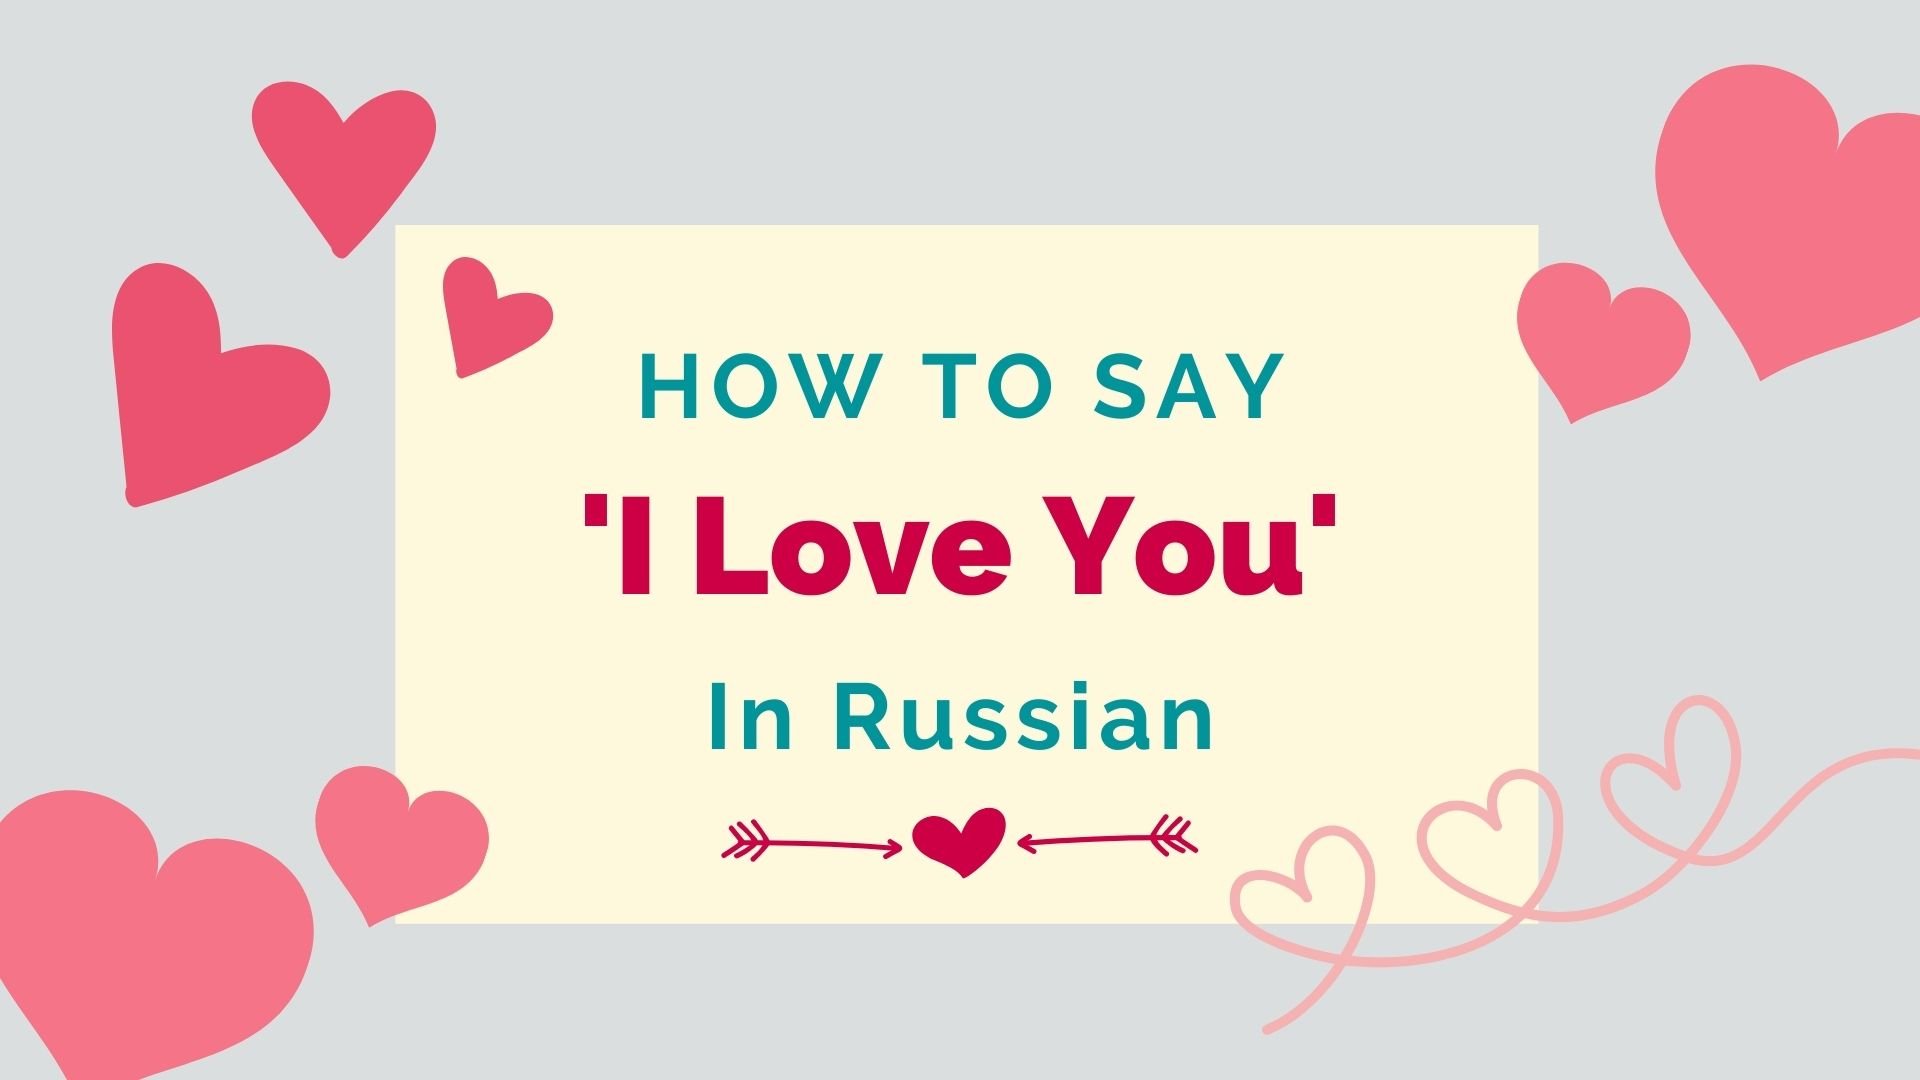 Say I love you in Russian - Words and phrases of love in Russian